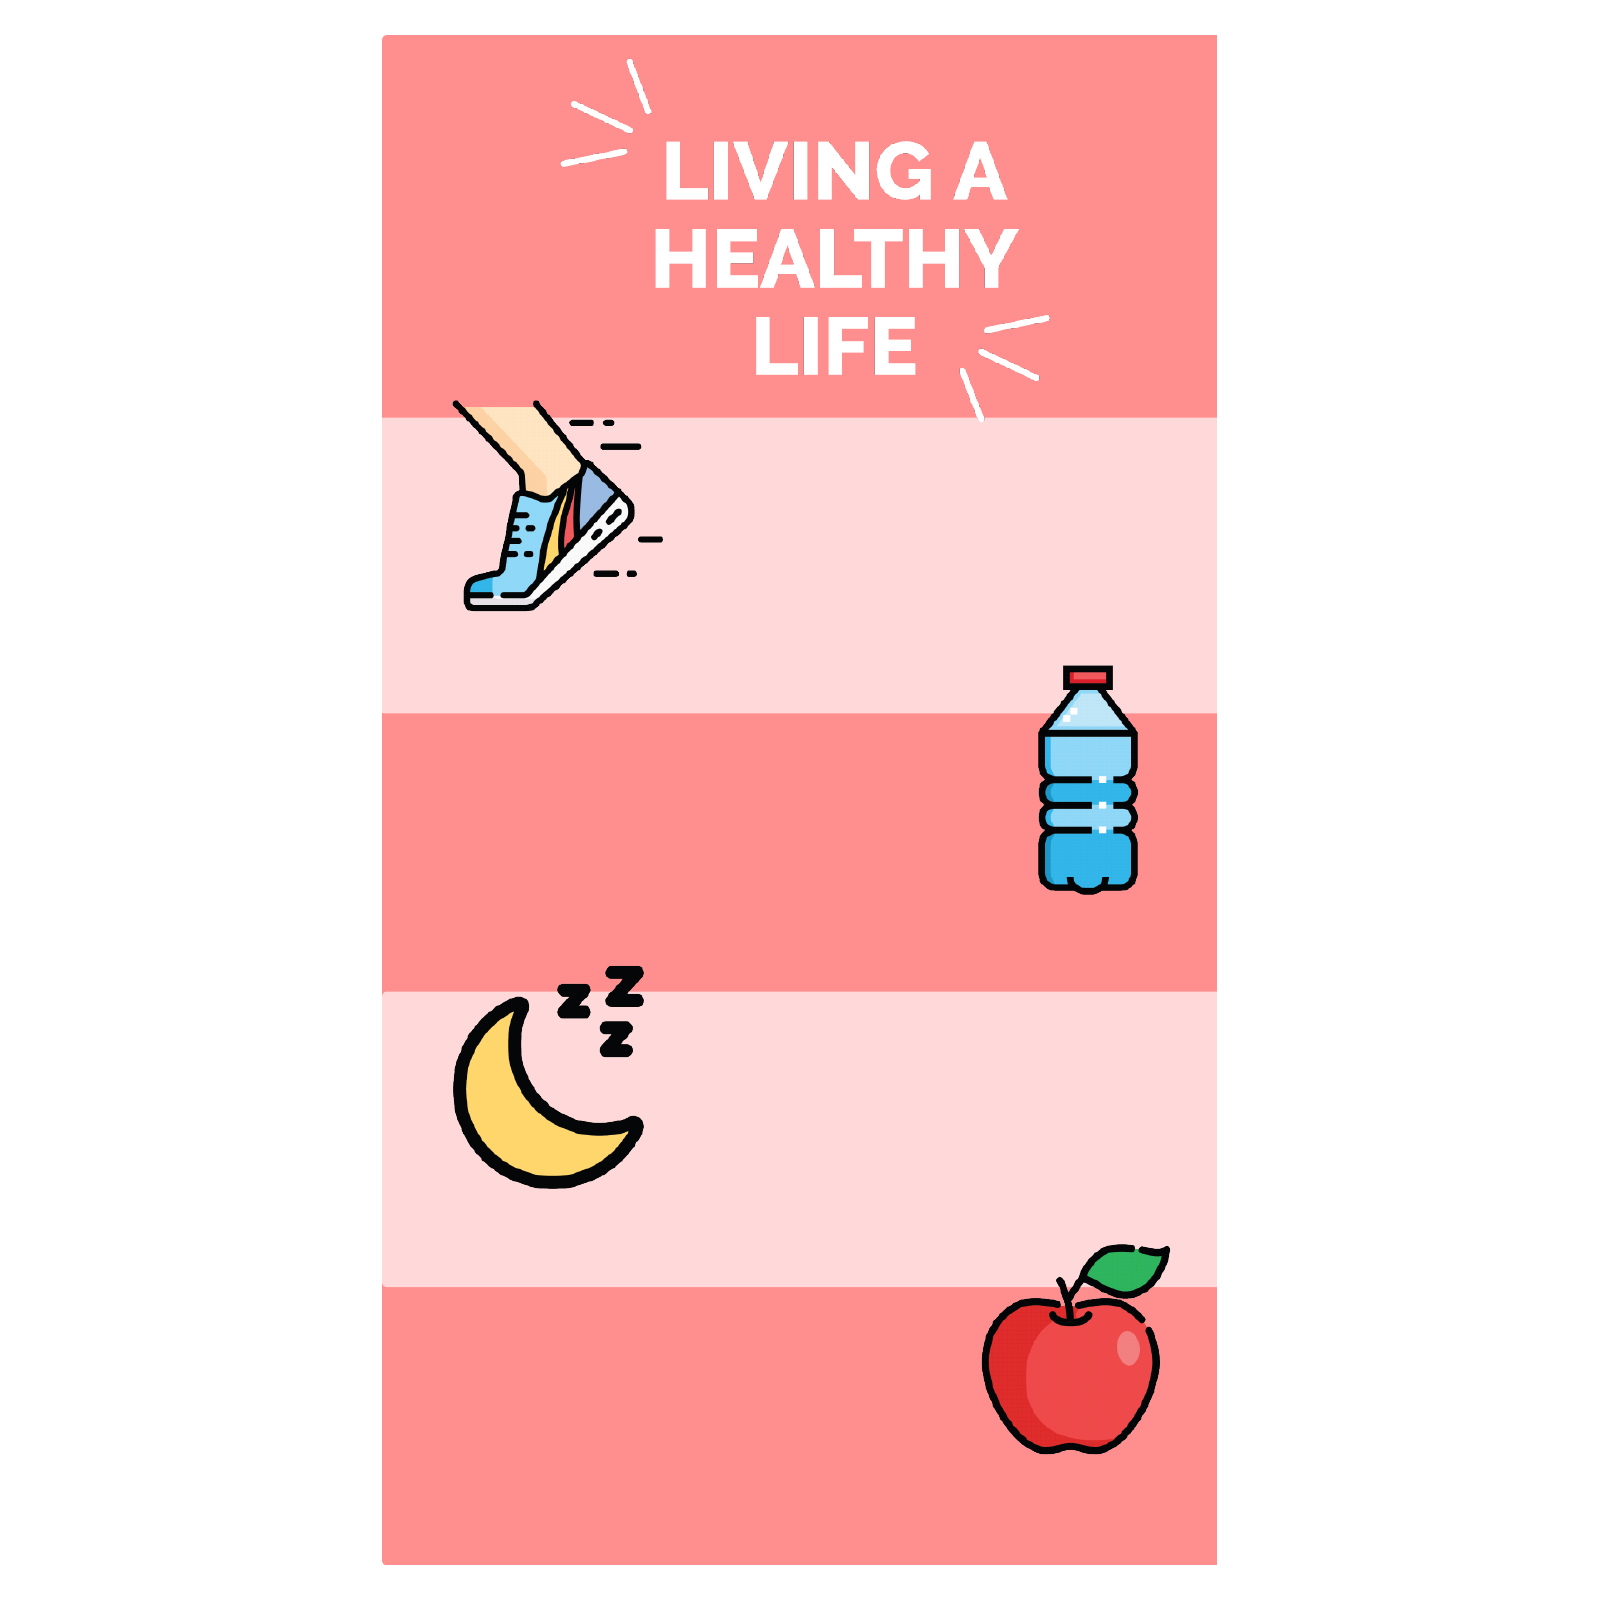 Healthy lifestyle infographic example